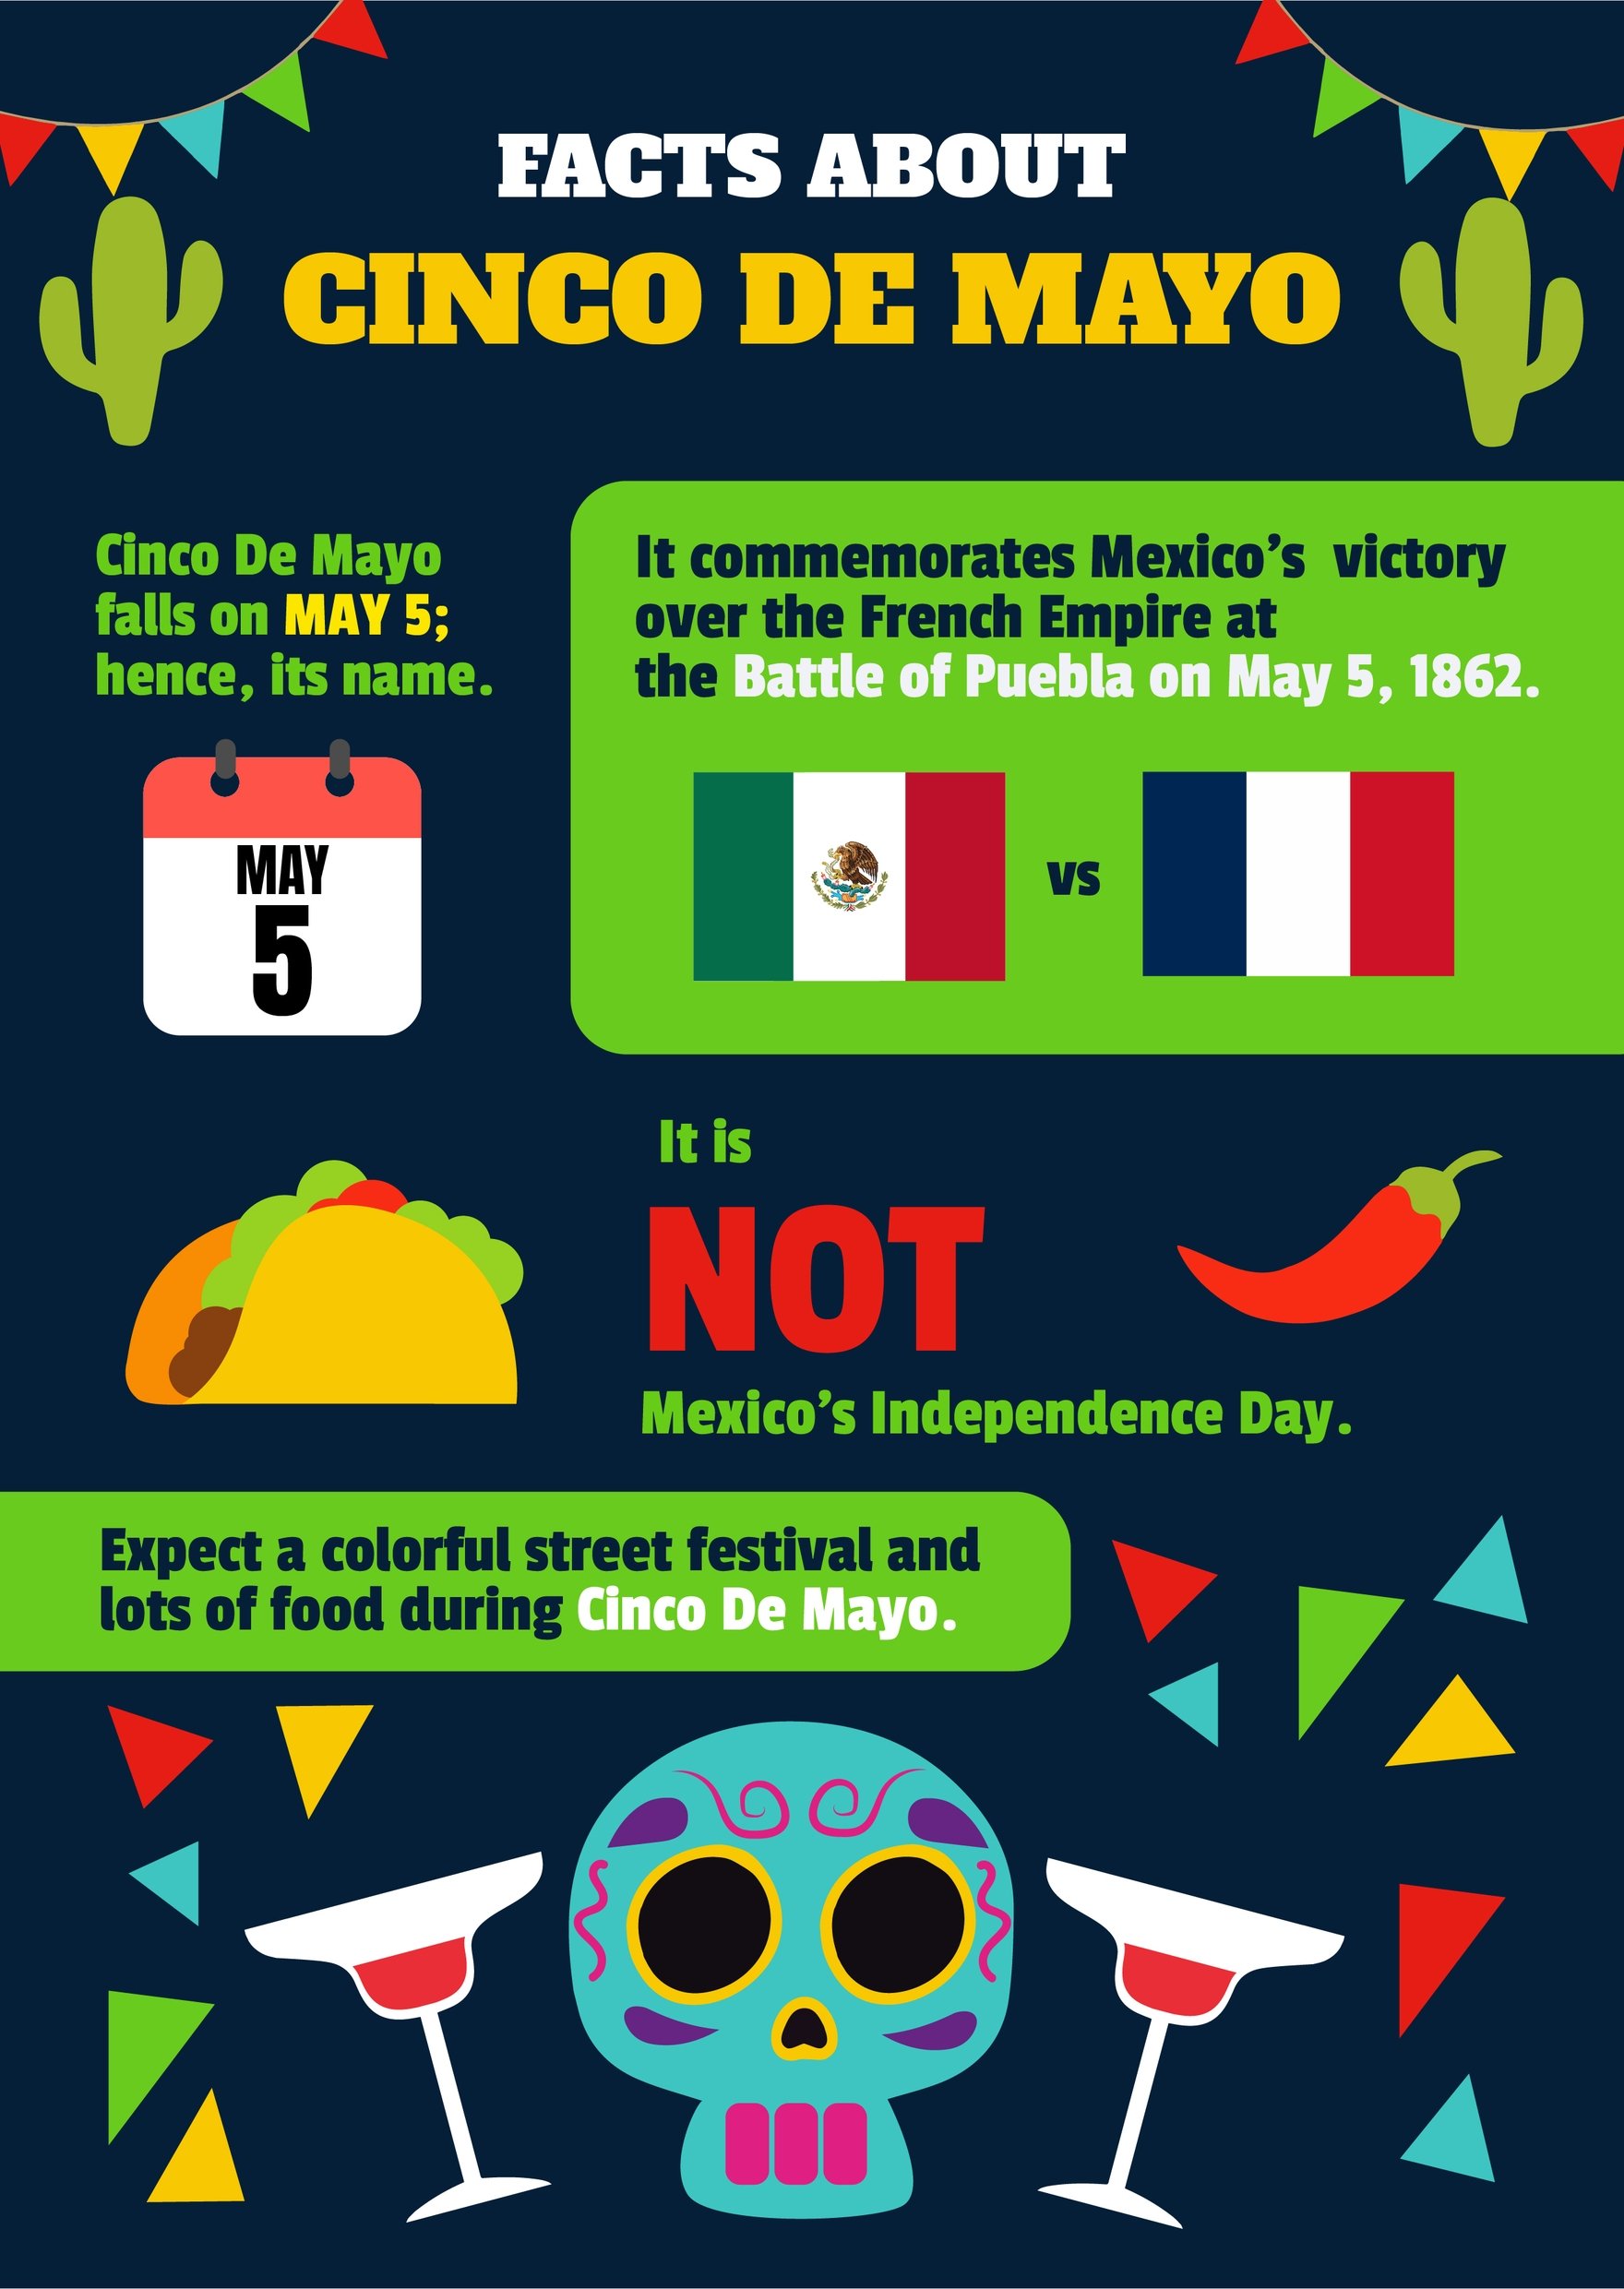 Facts About Cinco De Mayo in Illustrator